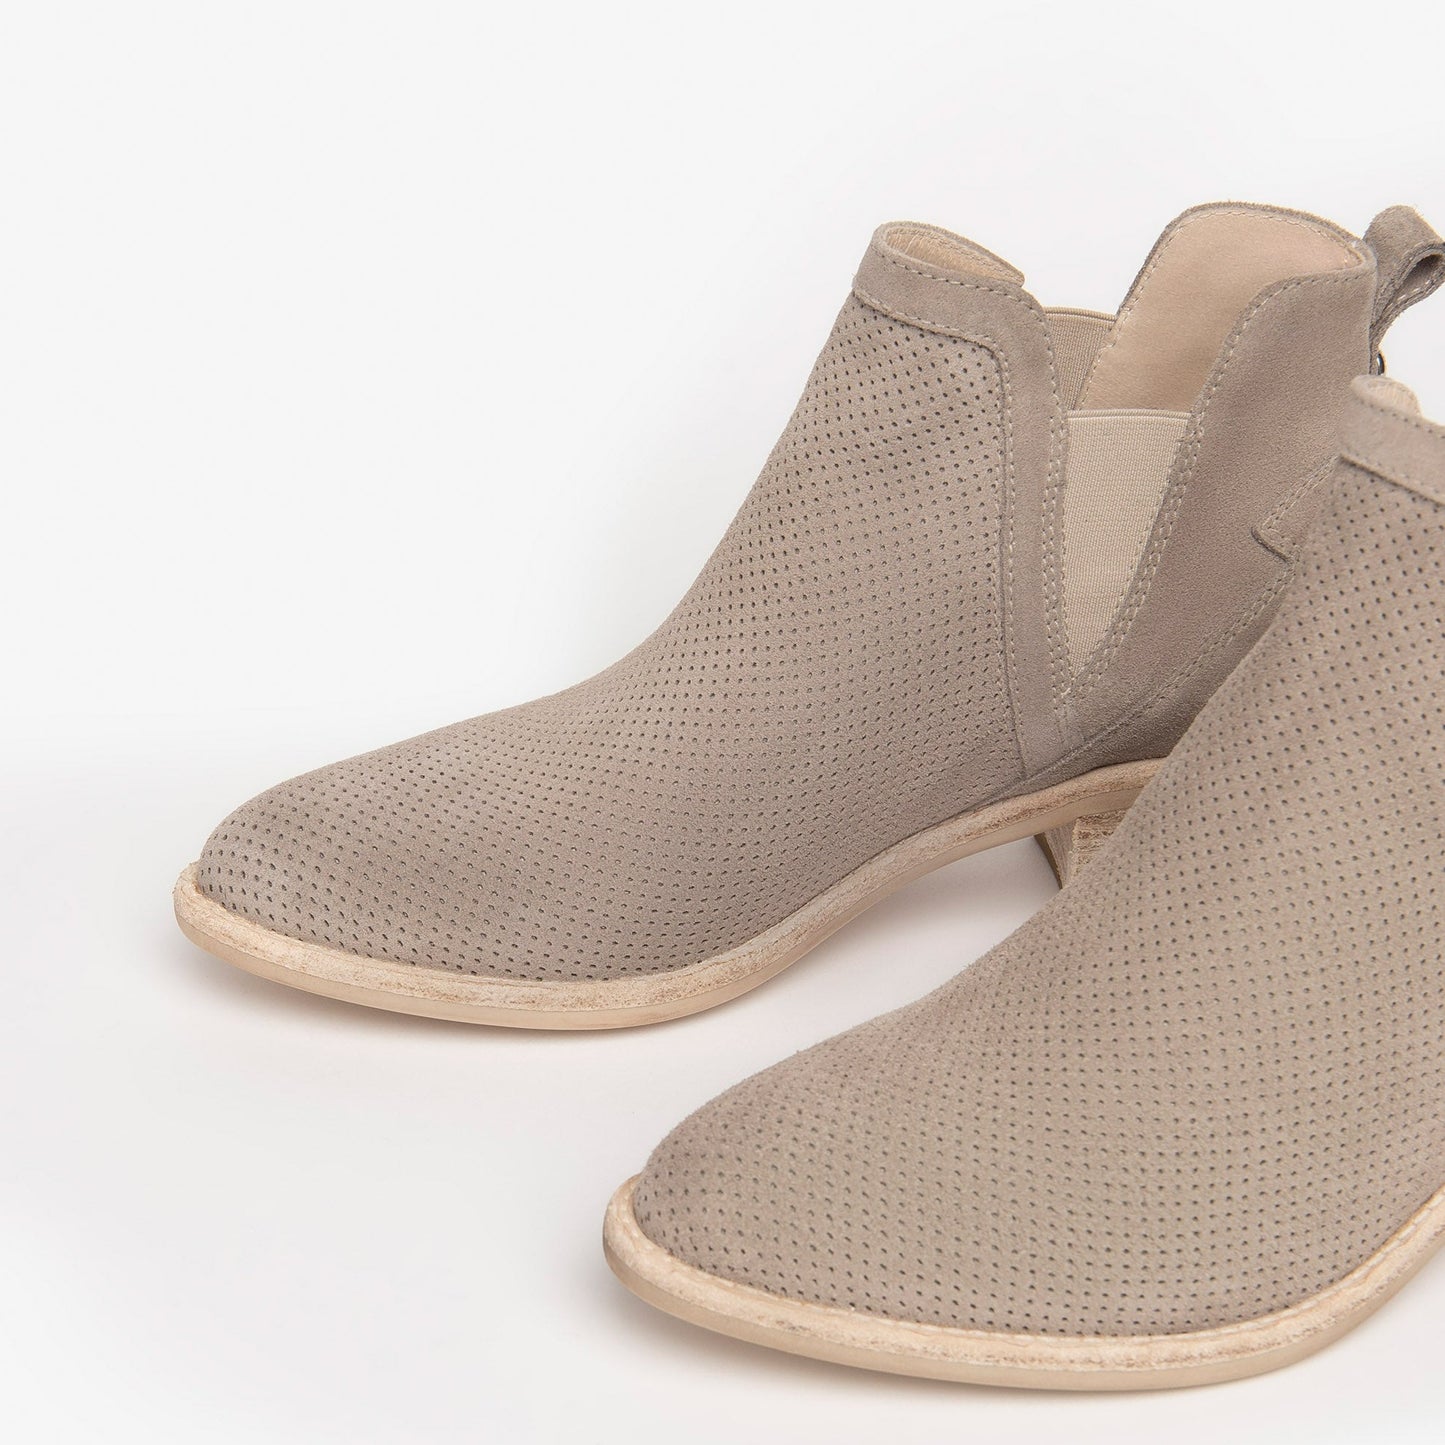 Ankle boots NeroGiardini woman beige suede